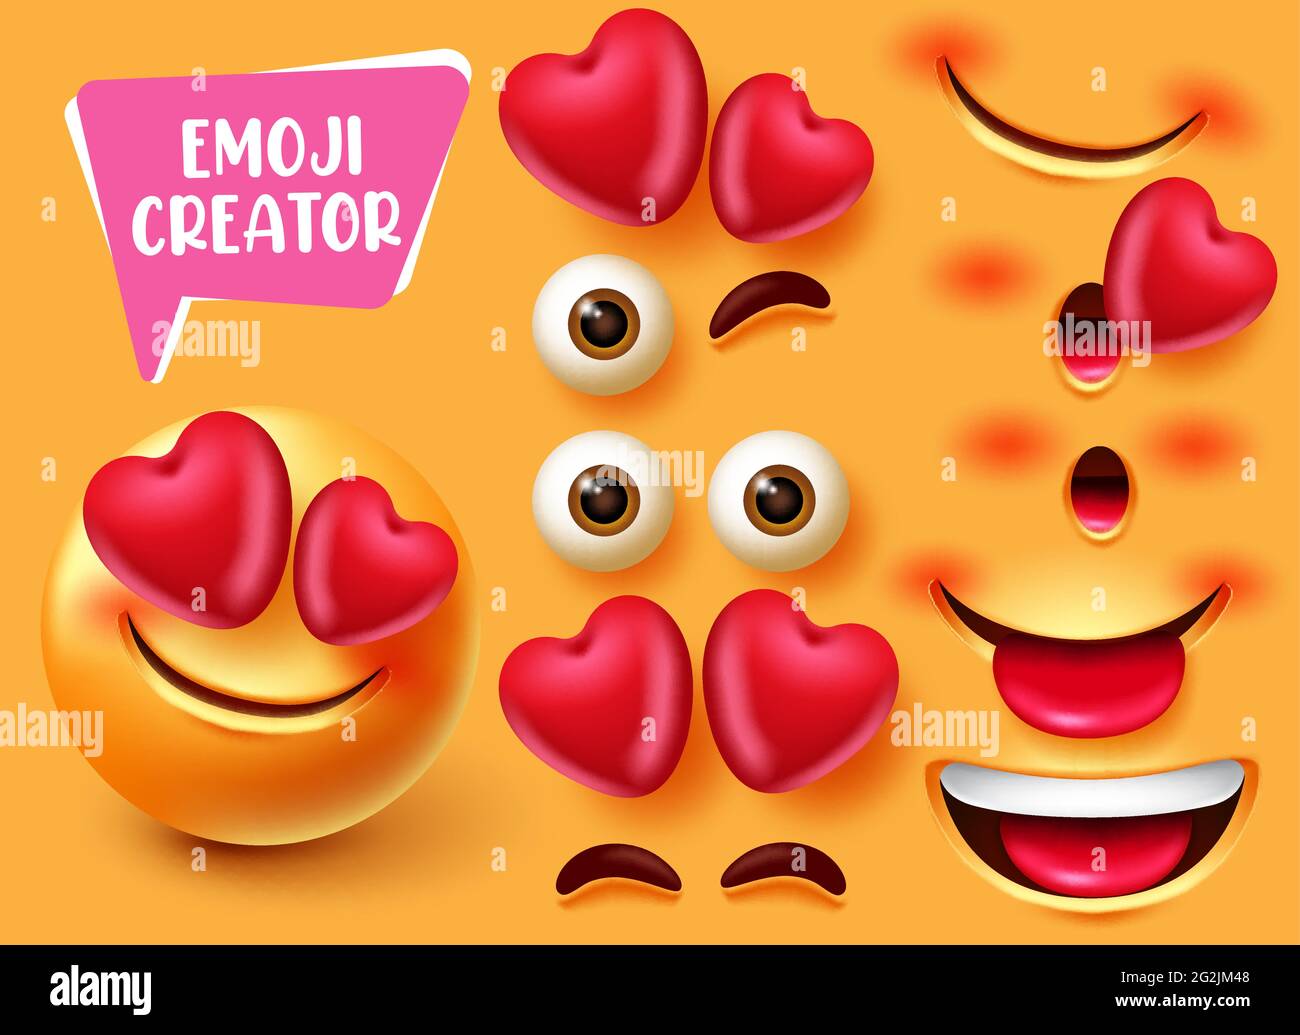 Emoji creator vector set design. Smiley 3d in love and happy character with editable eyes, heart and mouth elements for cute facial expression. Stock Vector